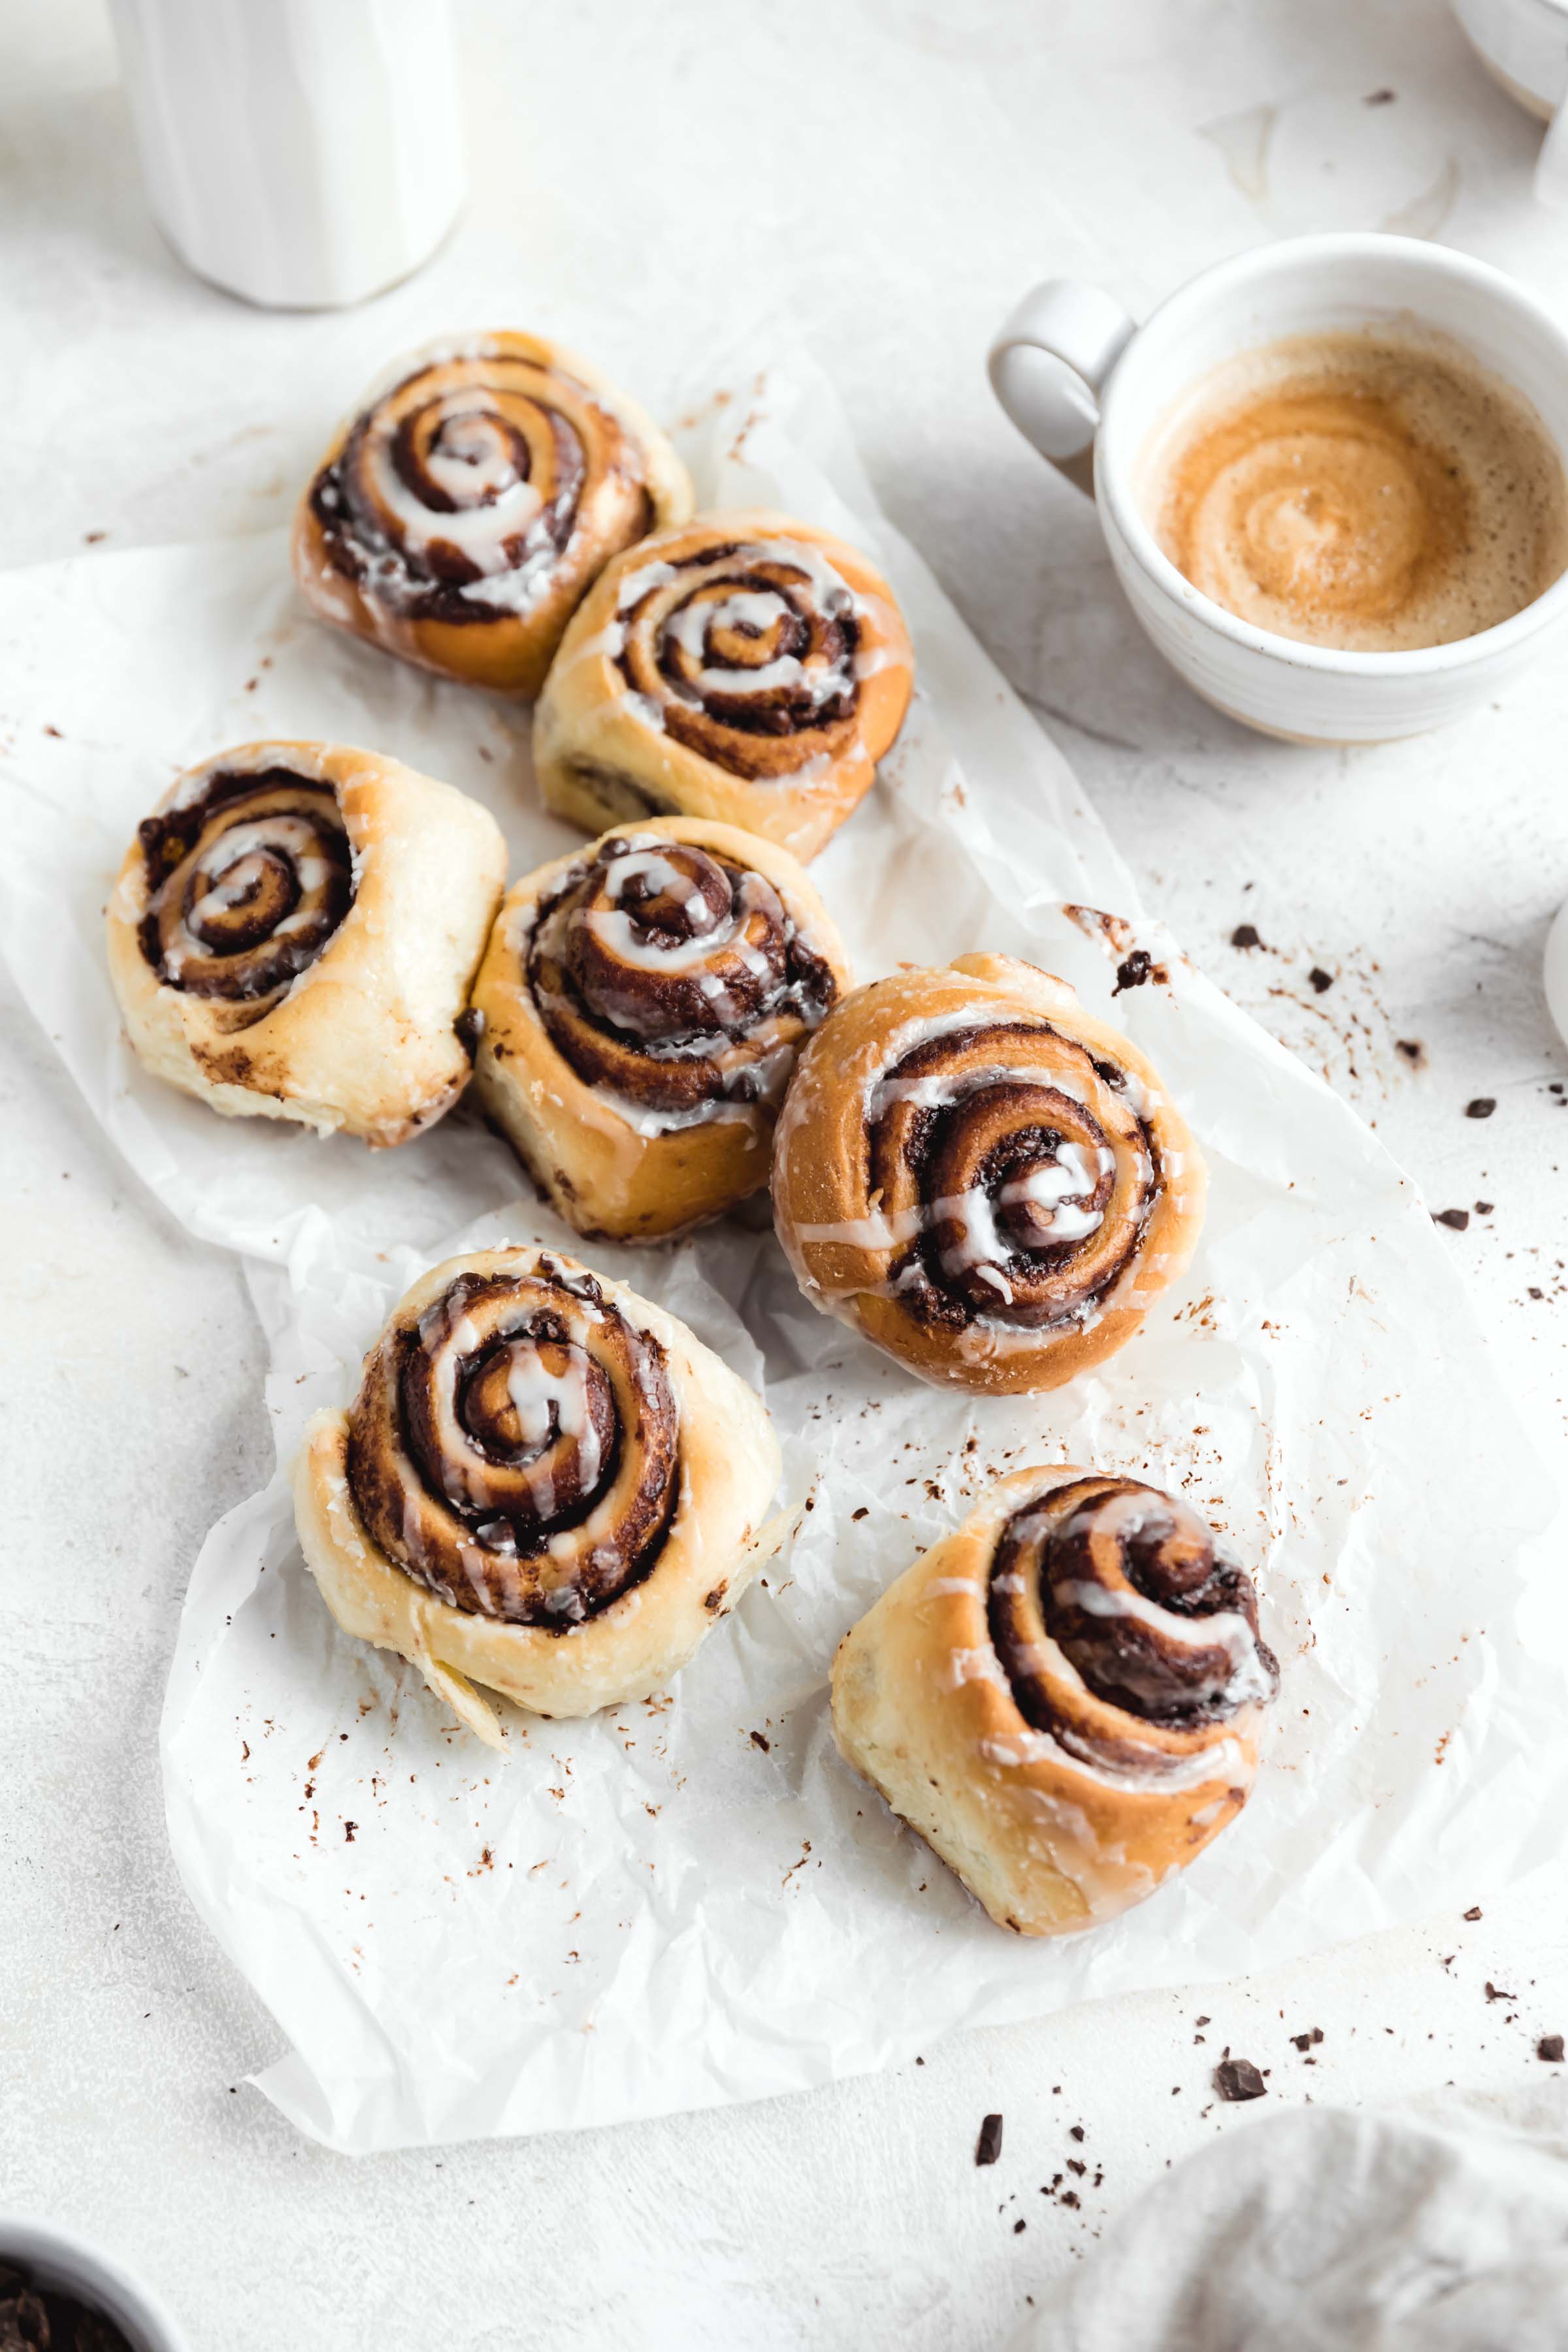 Nothing says holiday baking more than cinnamon rolls...except maybe CHOCOLATE cinnamon rolls. These pillow soft cinnamon rolls are filled with chocolate, drizzled wit the most perfect cream cheese icing and absolutely scrumptious. Best part? They’re ready in under an hour. #cinnamonrolls #bromabakery #foodphotography #easy